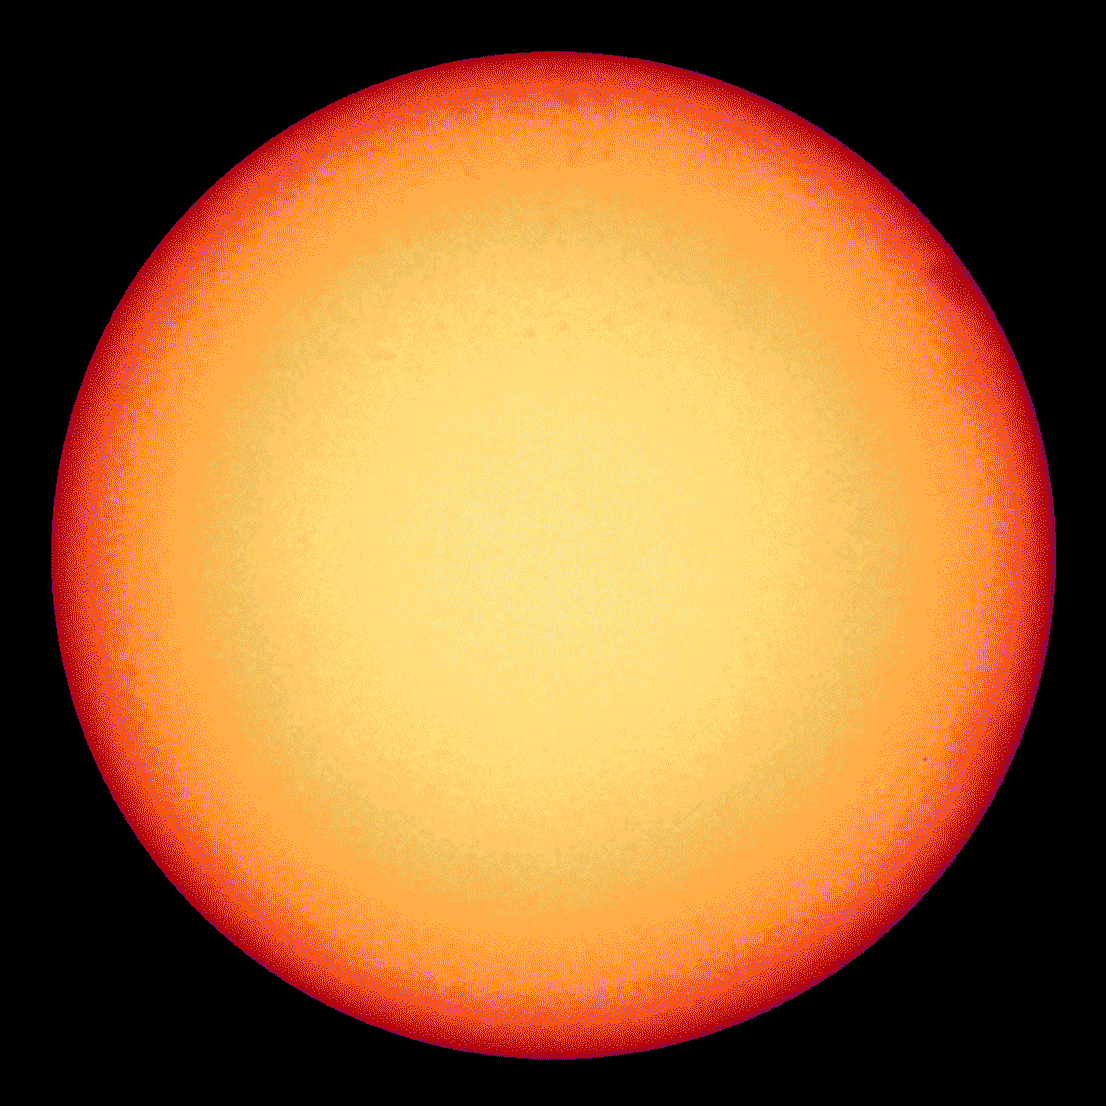 An animated image shows a series of full-disk images and close-ups of the Sun using natural and false colors